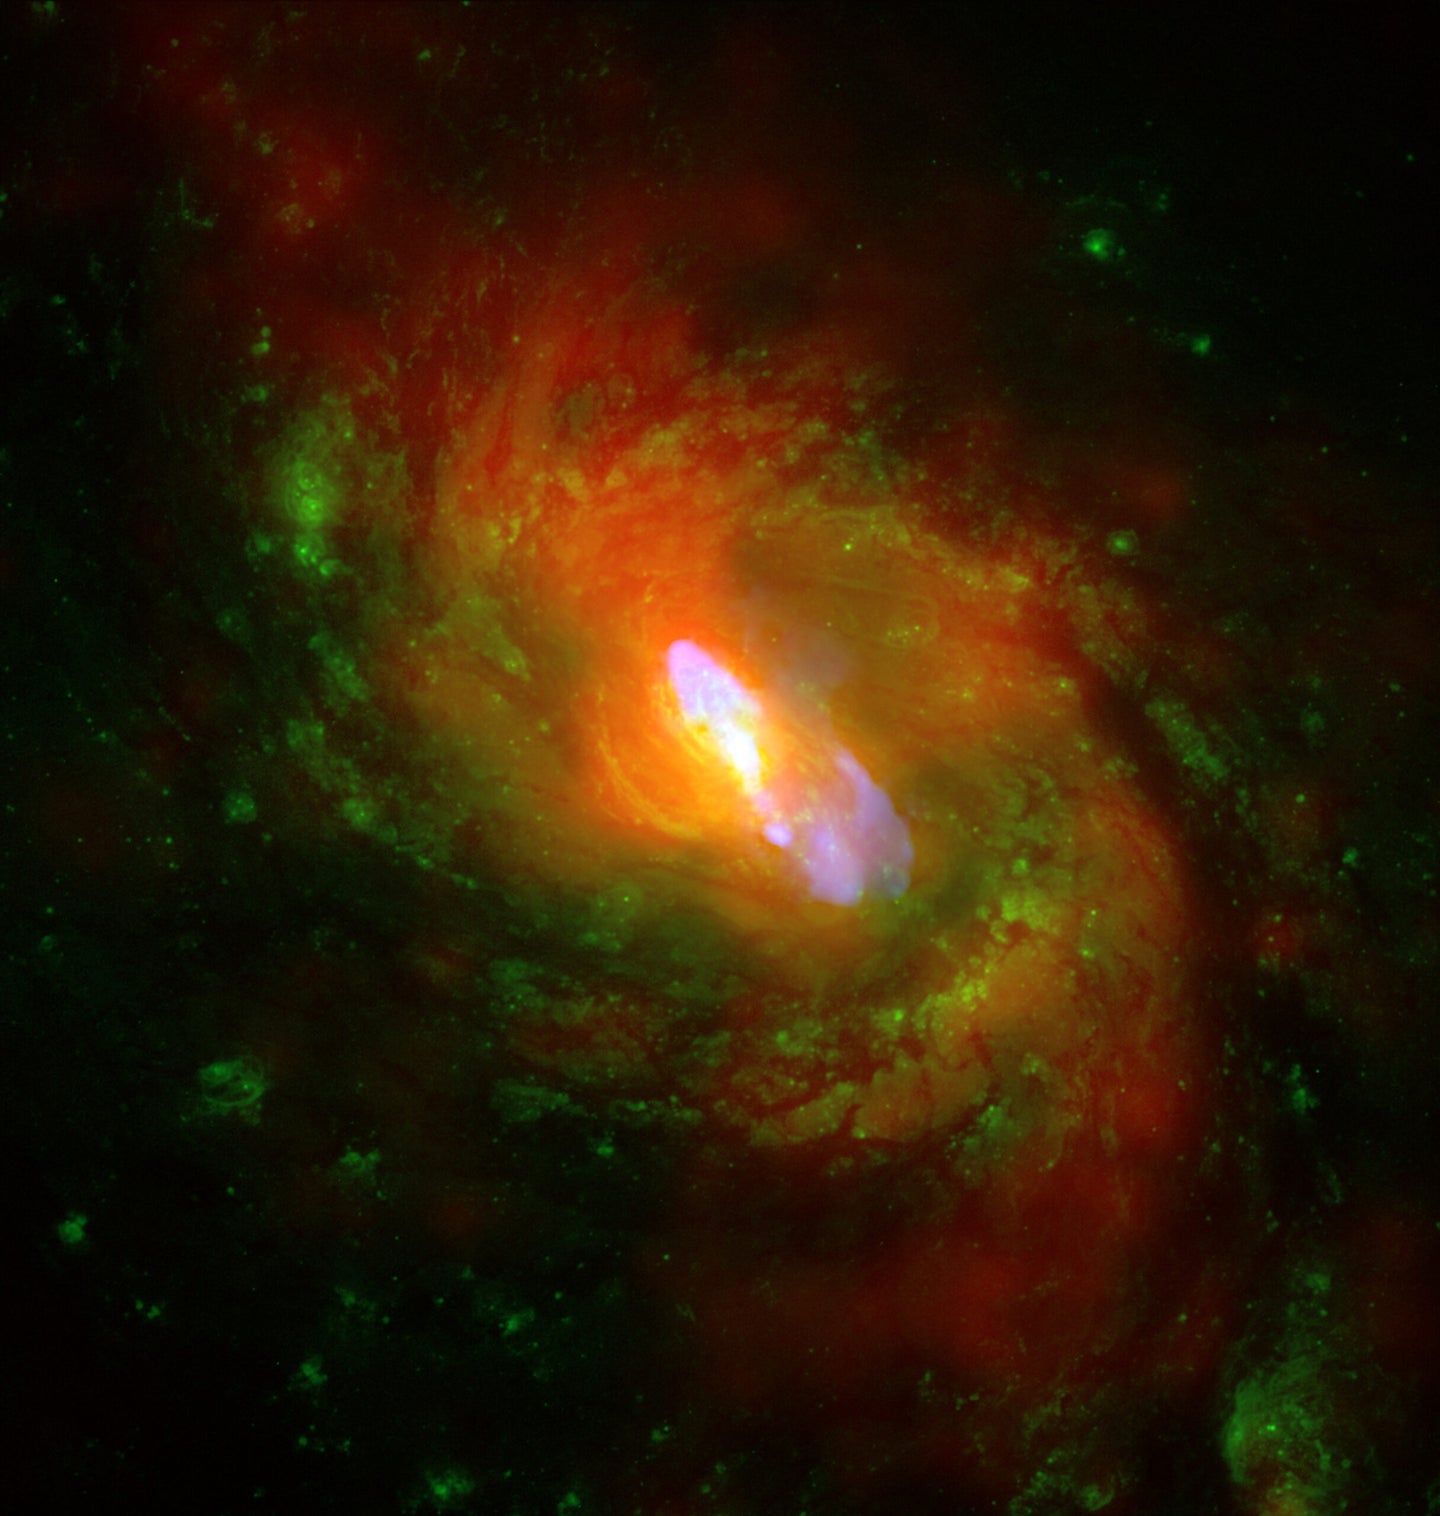 This composite image (X-rays from Chandra in red, optical data in green, and radio emission in blue) shows NGC 1068, one of the nearest and brightest spiral galaxies containing a rapidly growing supermassive black hole. The X-ray images and spectra obtained using Chandra's High Energy Transmission Grating Spectrometer show that a strong wind is being driven away from the center of NGC 1068 at a rate of about a million miles per hour. These results help explain how an "average"-sized supermassive black hole can alter the evolution of its host galaxy.